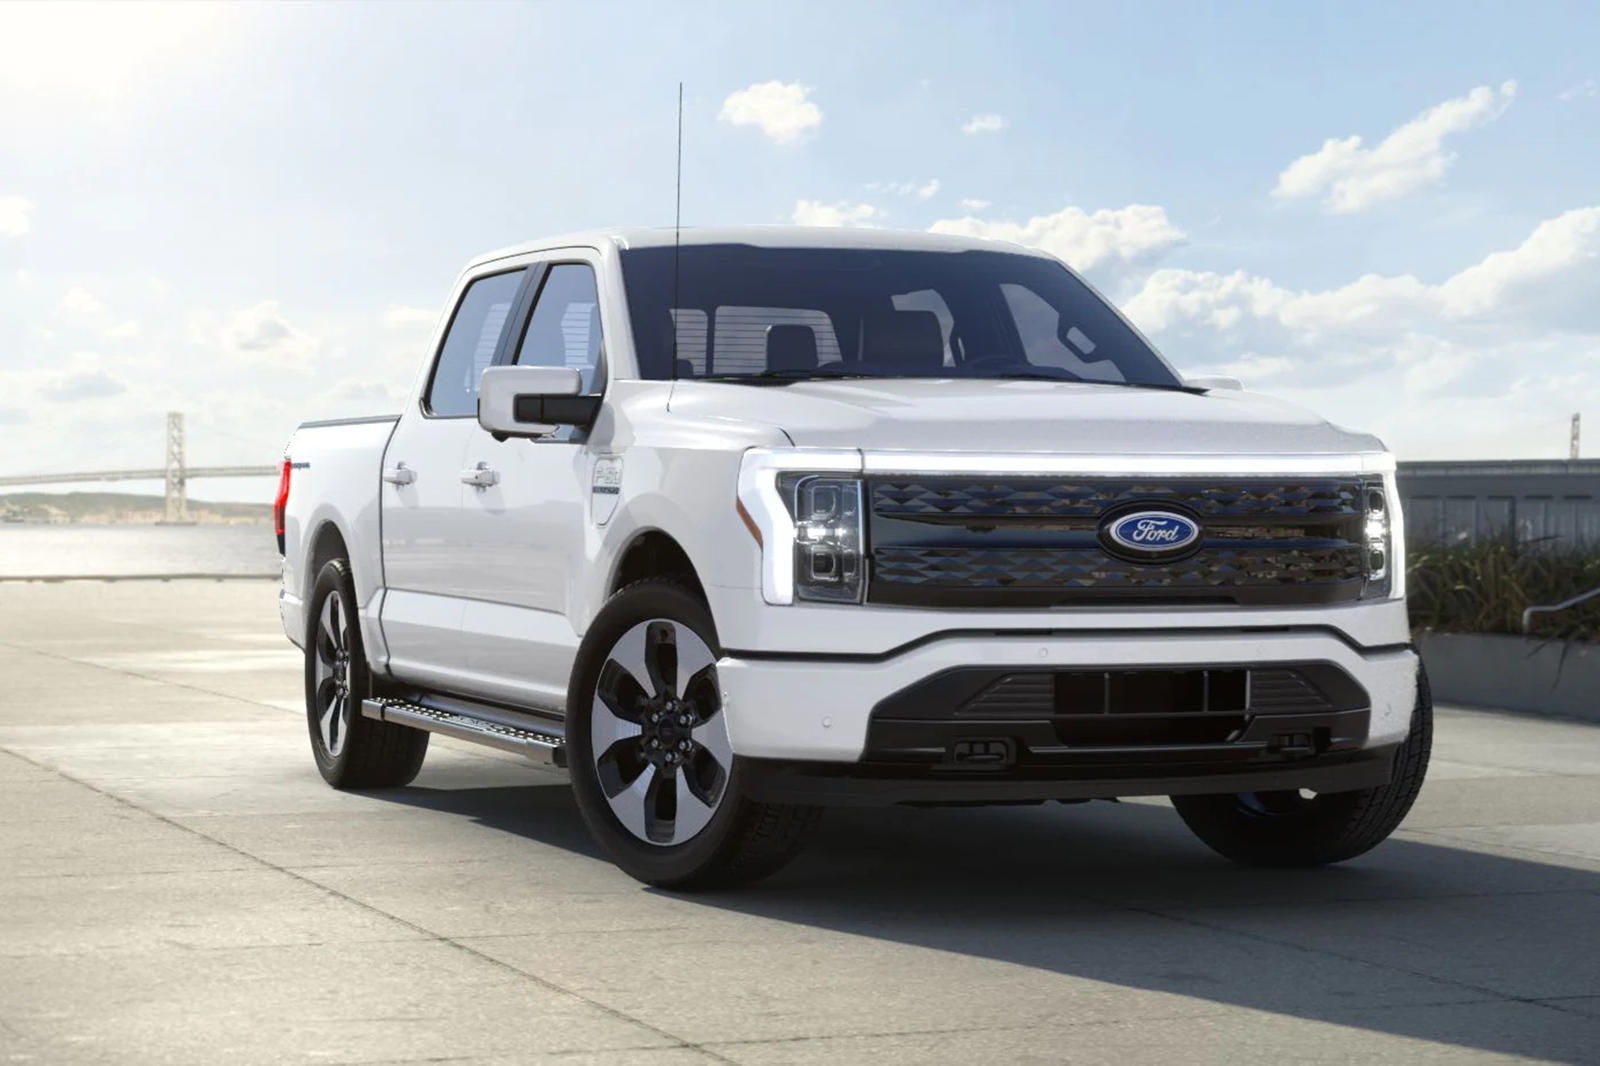 Full Ford F150 Lightning Pricing Leaks Early CarBuzz